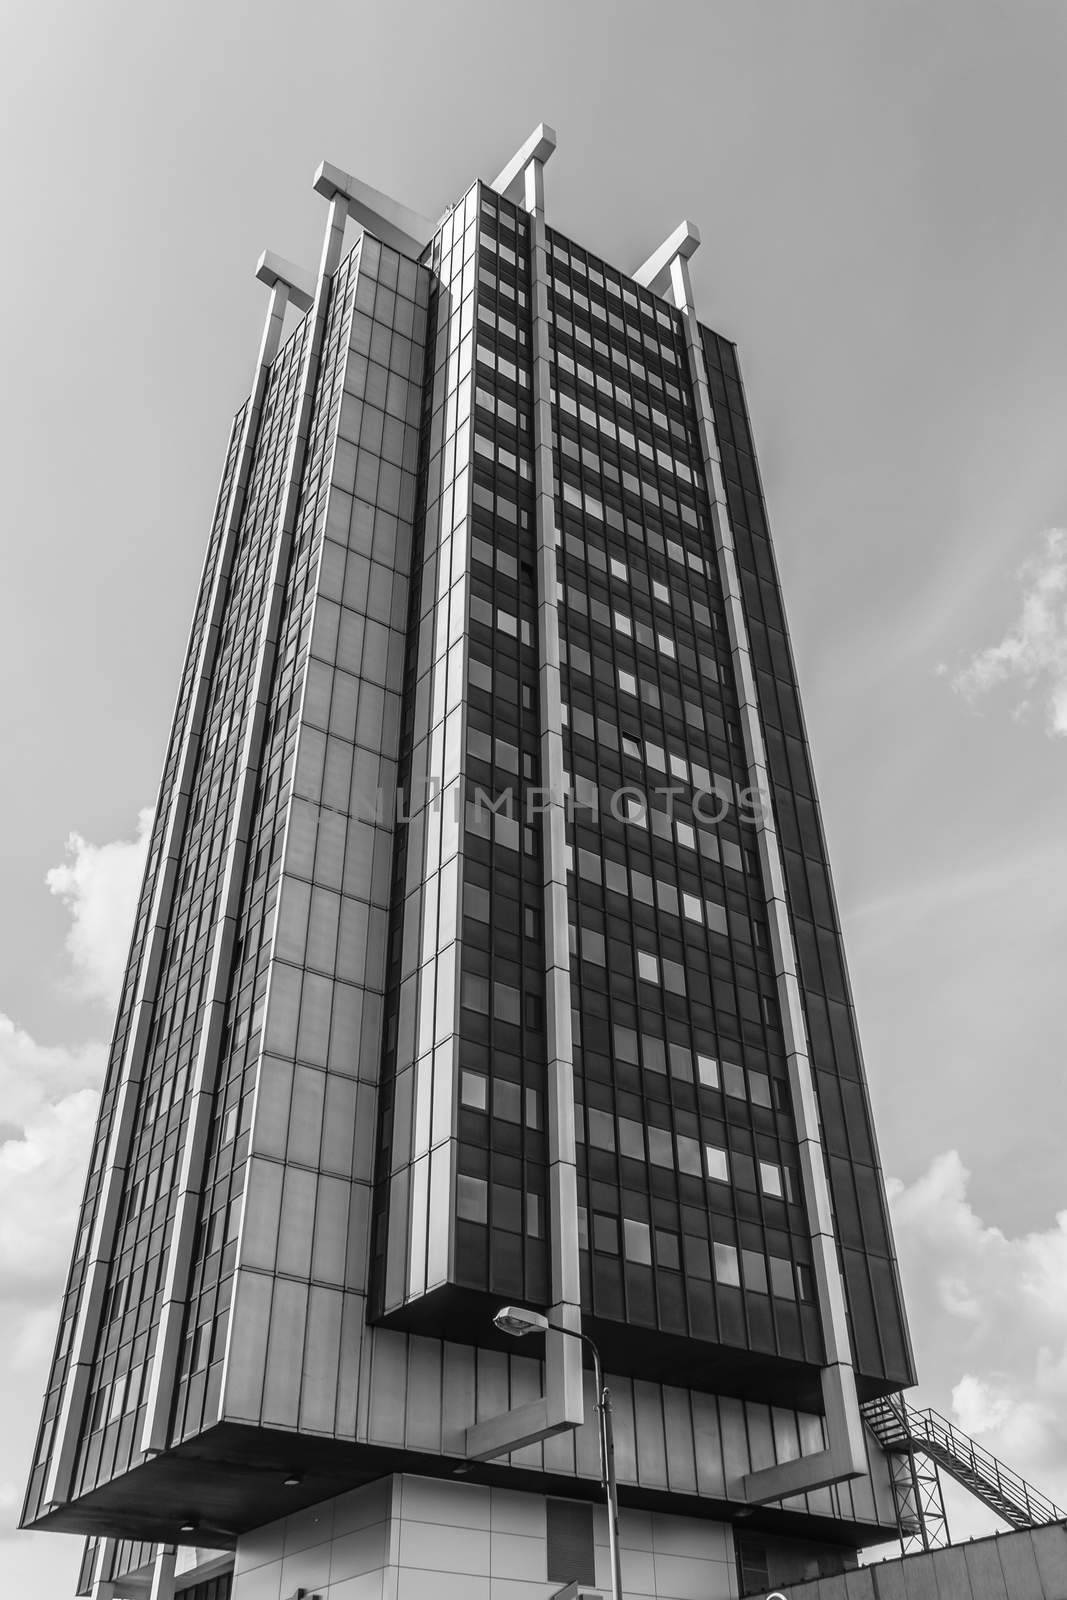 One of two Stalexport skyscrapers sharing the same base. Built in the early 1980s characteristic towers remain one of the most recognizable landmarks of the city.